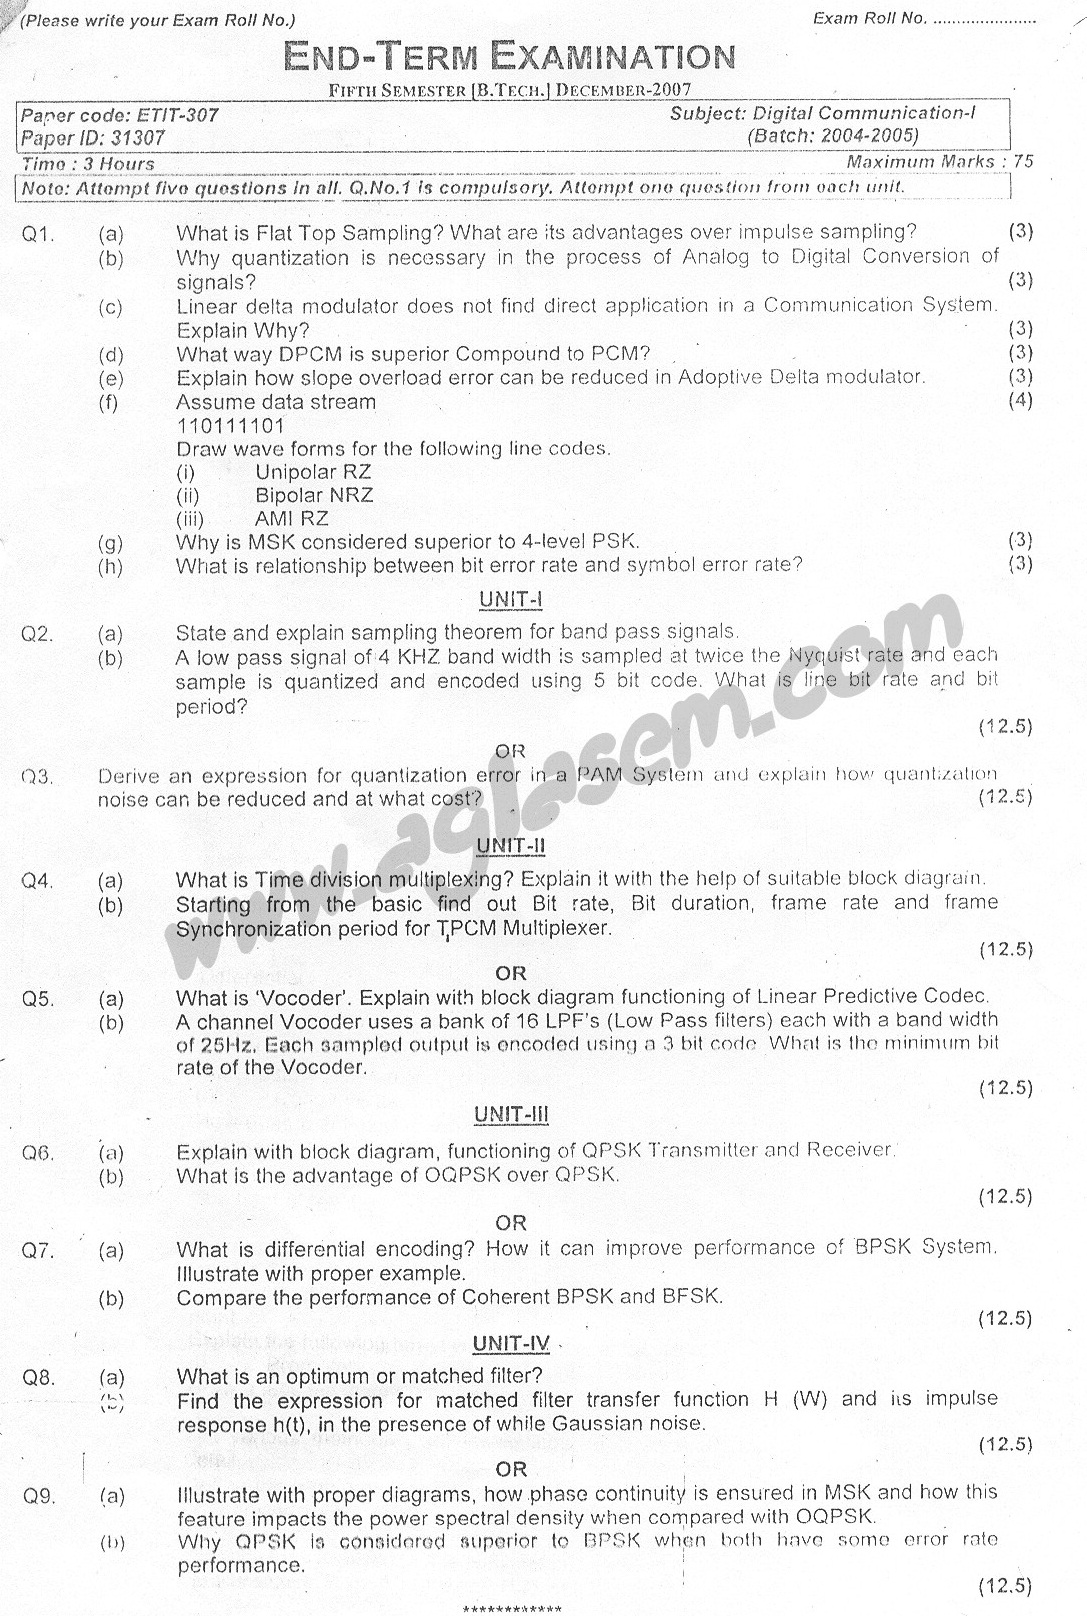 GGSIPU Question Papers Fourth Semester  end Term 2007  ETIT_307